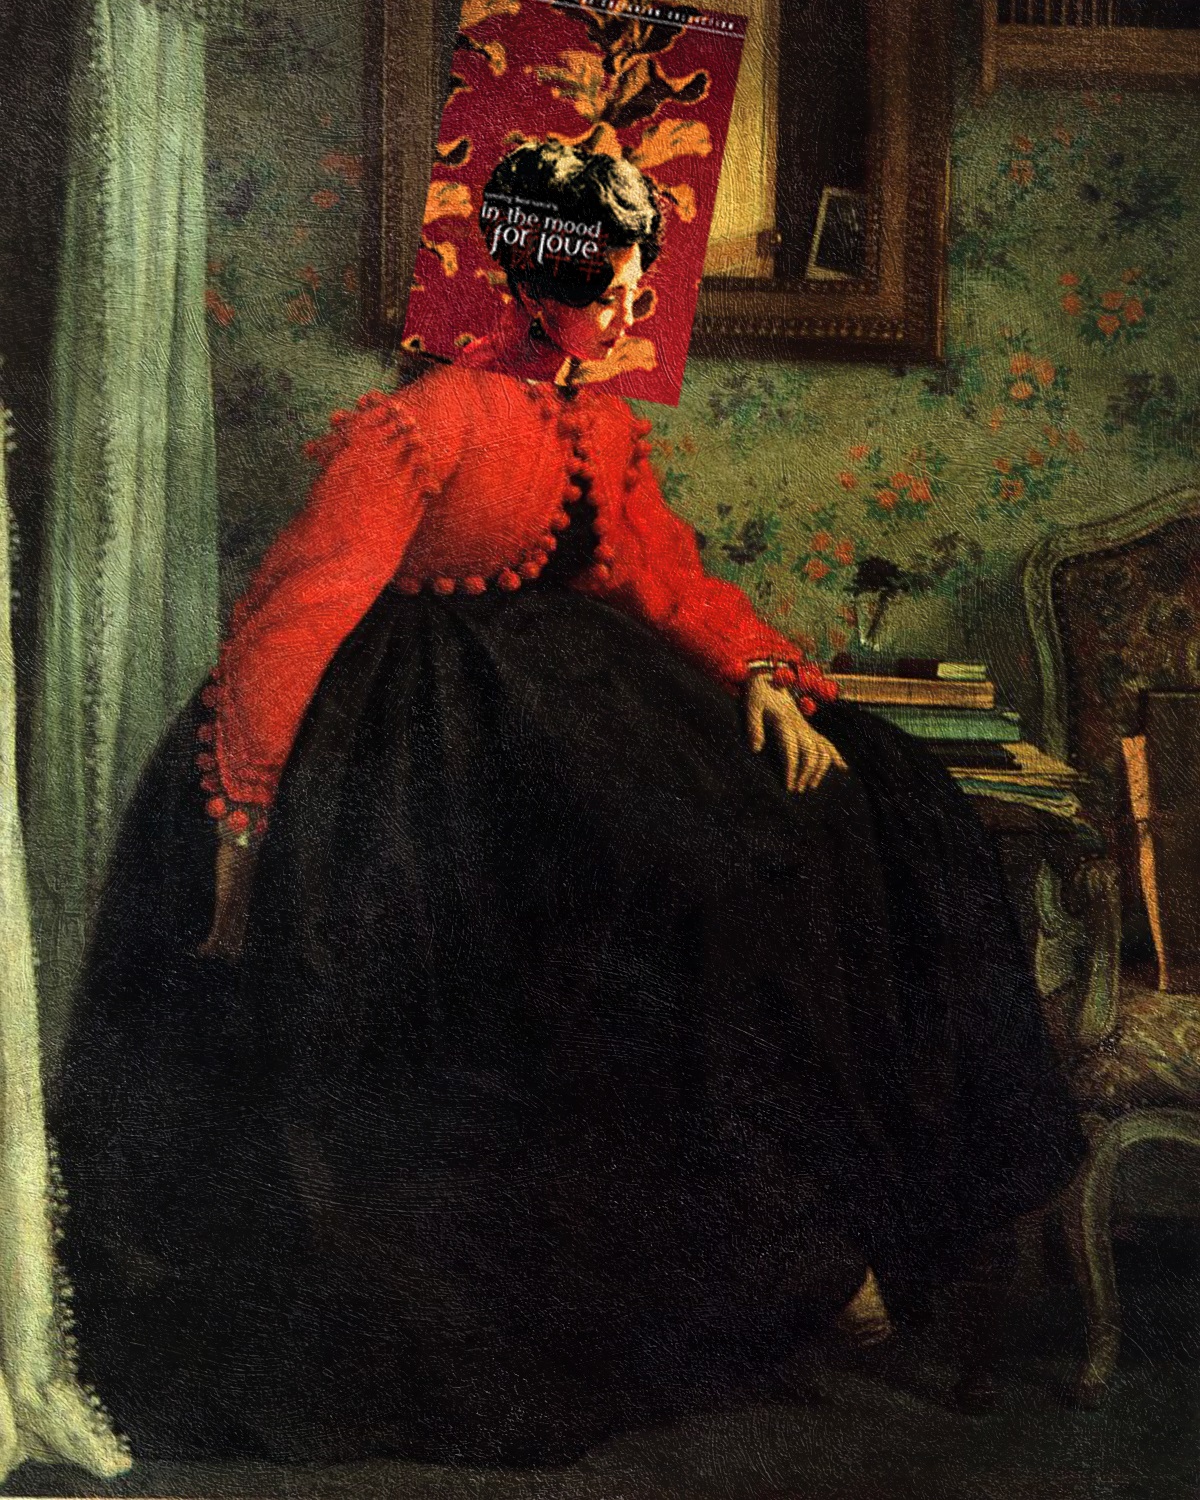 In the Mood for Love by Wong Kar-Wai + Portrait of Mlle. L.L. (Young Lady in a Red Jacket) by James Tissot